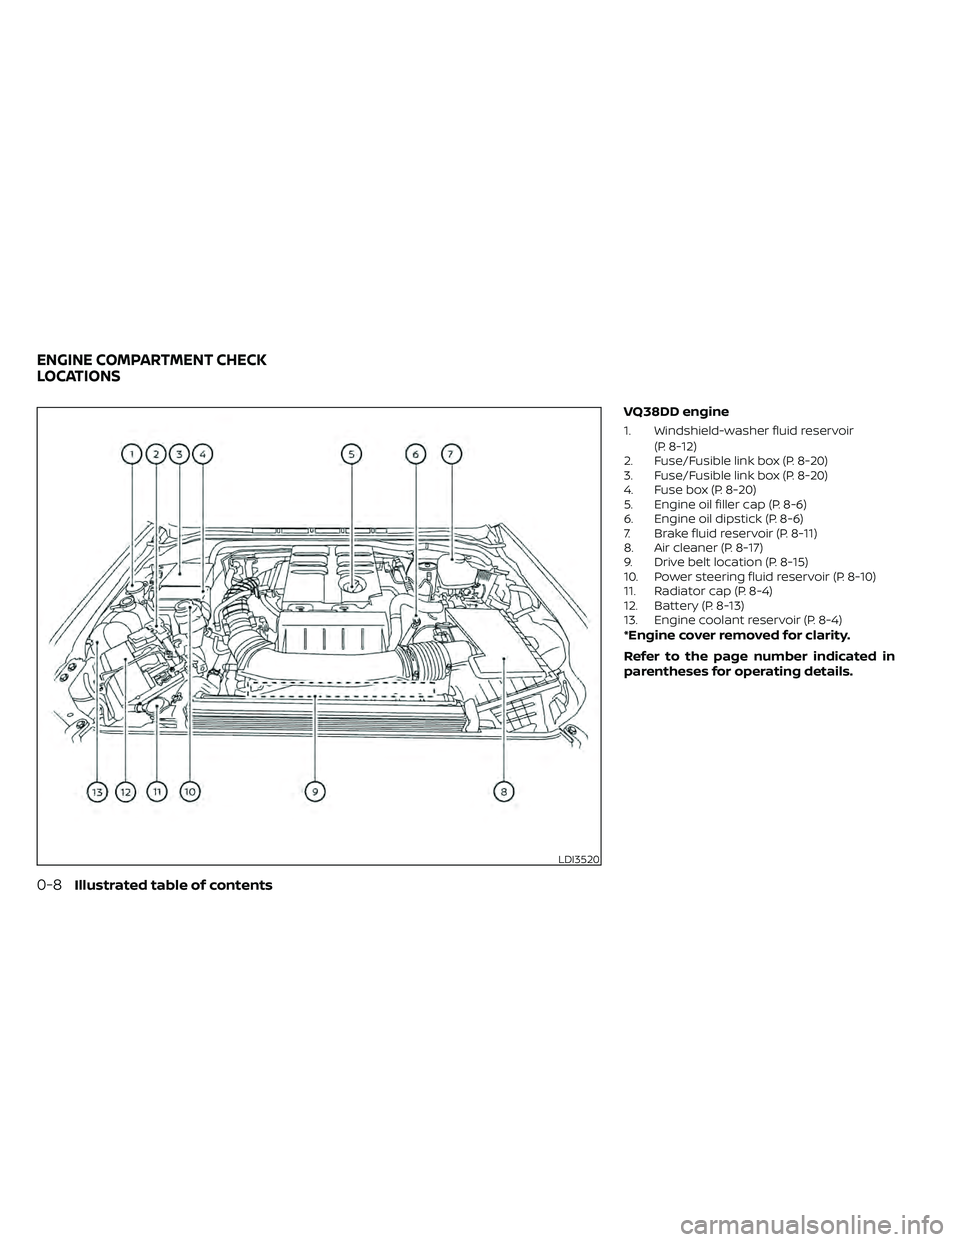 NISSAN FRONTIER 2021  Owners Manual VQ38DD engine
1. Windshield-washer fluid reservoir(P. 8-12)
2. Fuse/Fusible link box (P. 8-20)
3. Fuse/Fusible link box (P. 8-20)
4. Fuse box (P. 8-20)
5. Engine oil filler cap (P. 8-6)
6. Engine oil 